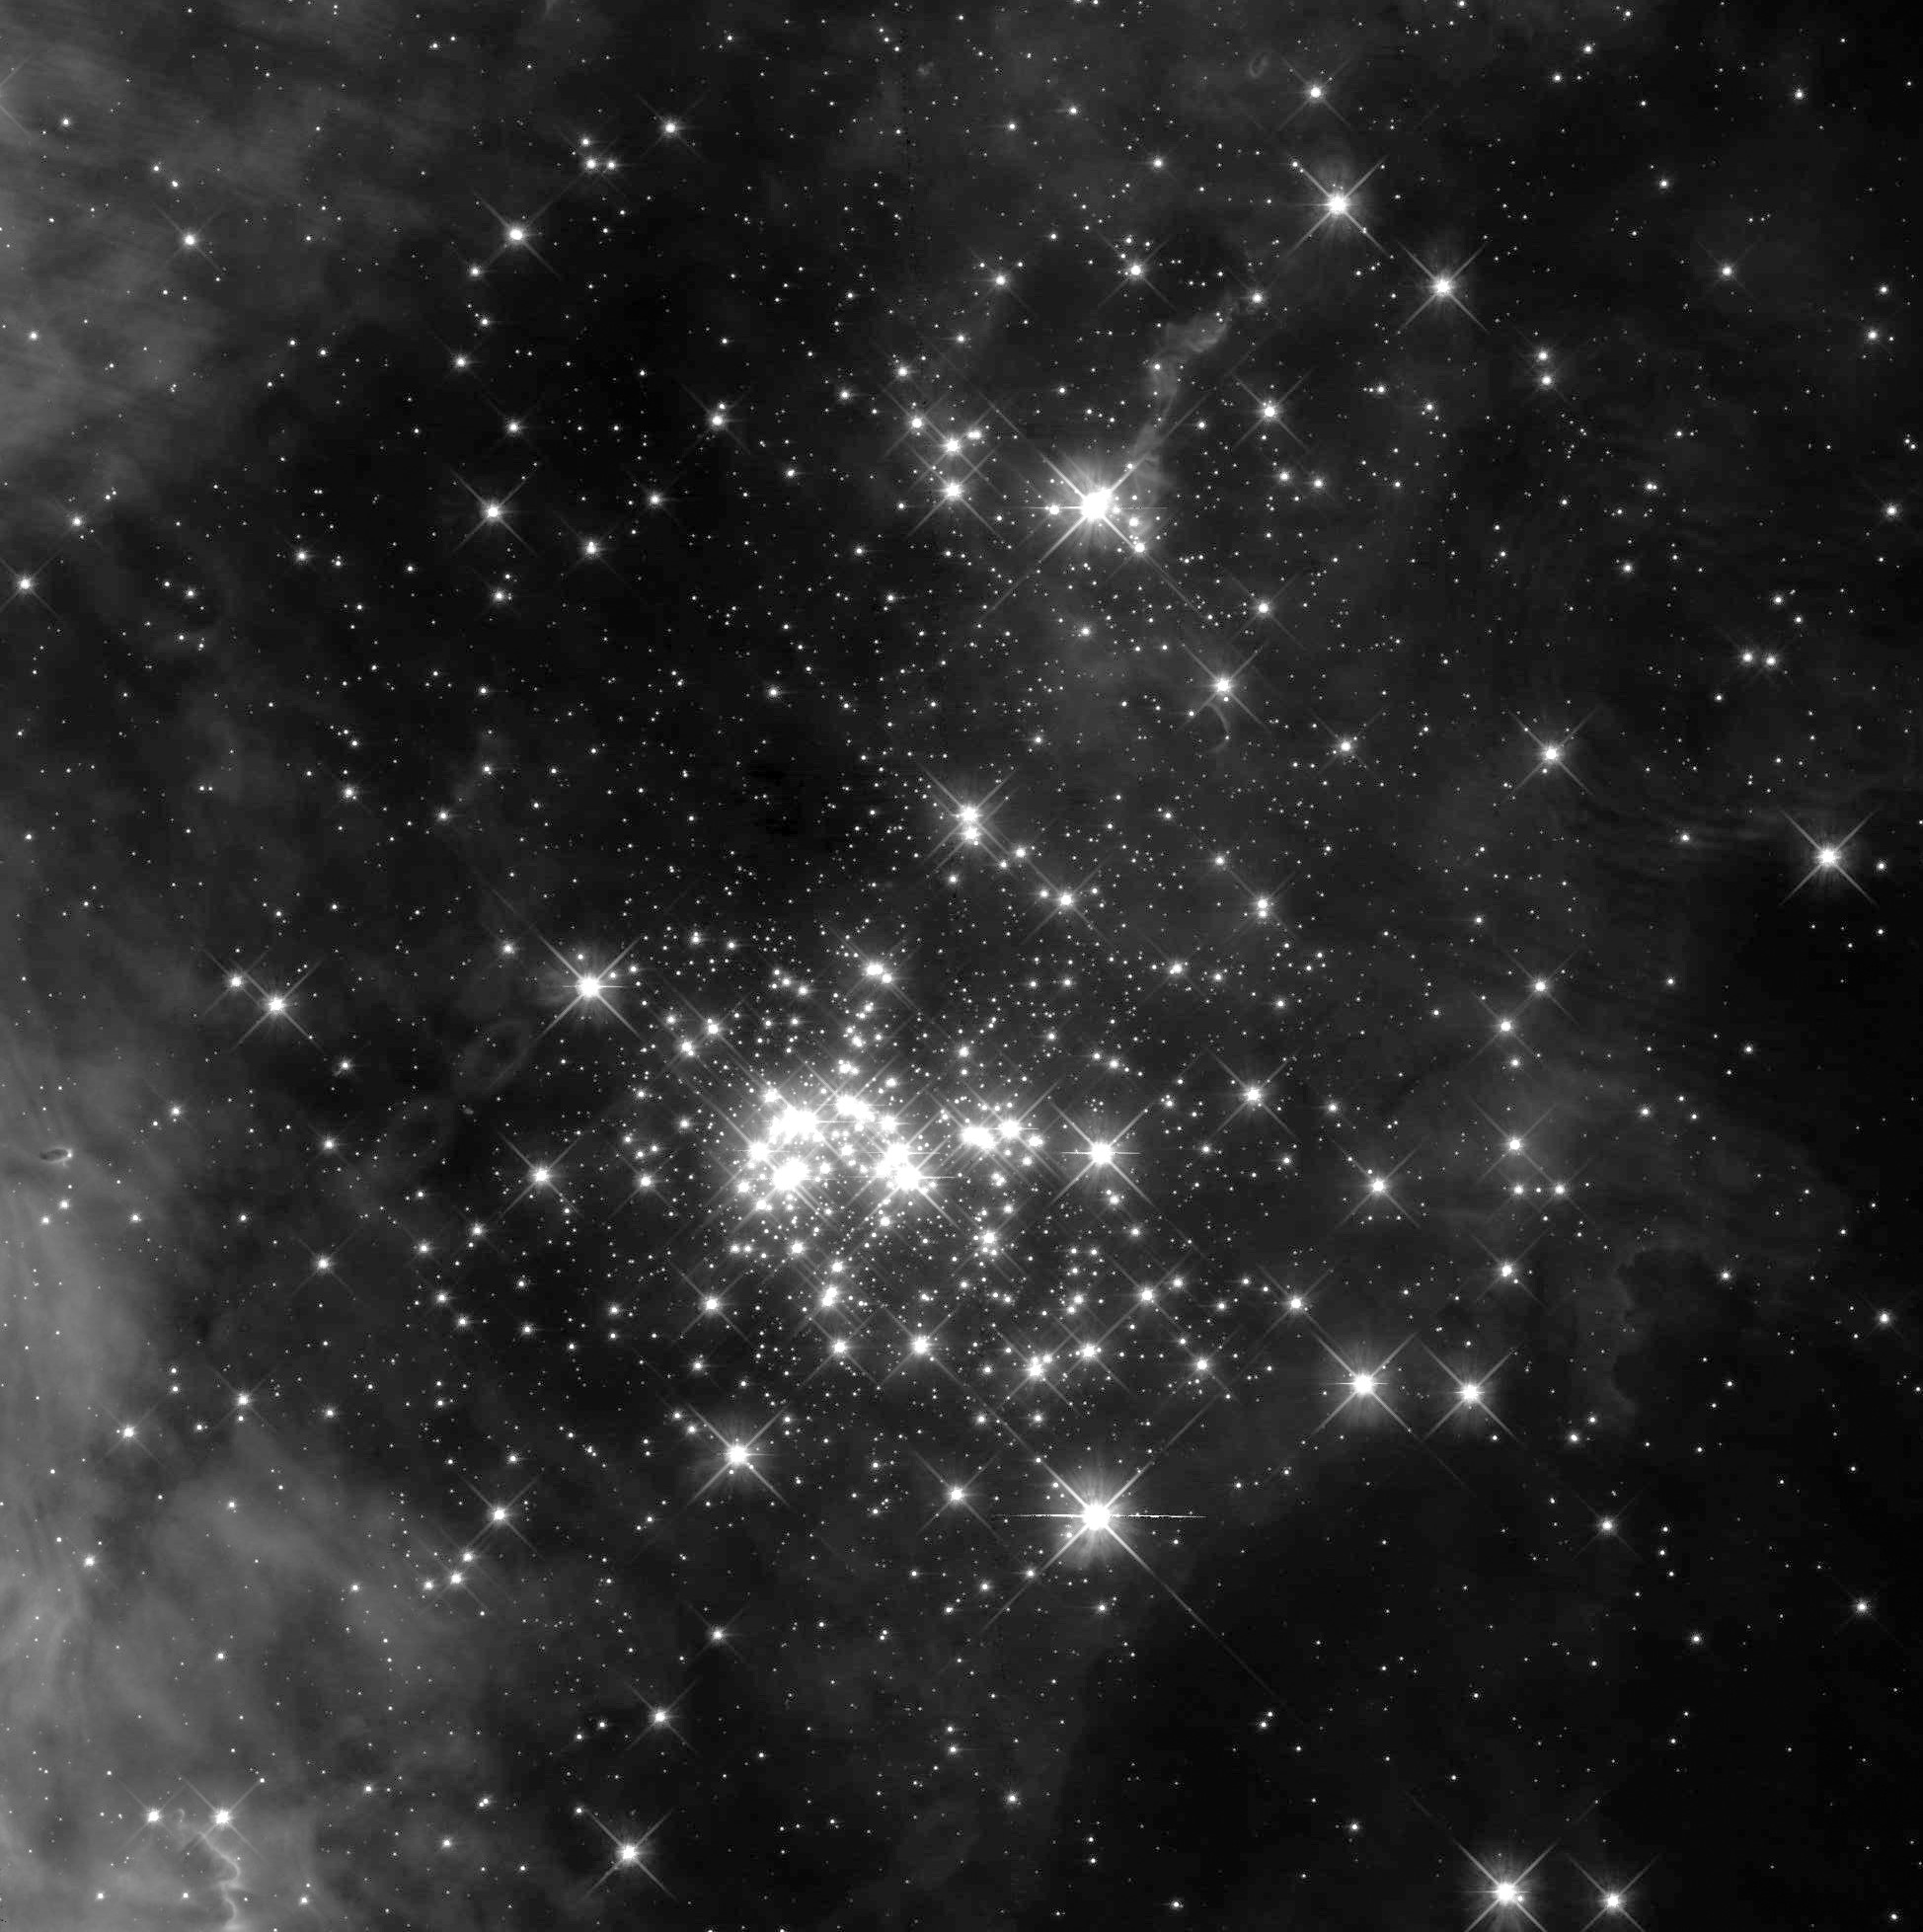 Black and white Hubble image of the Westerlund cluster